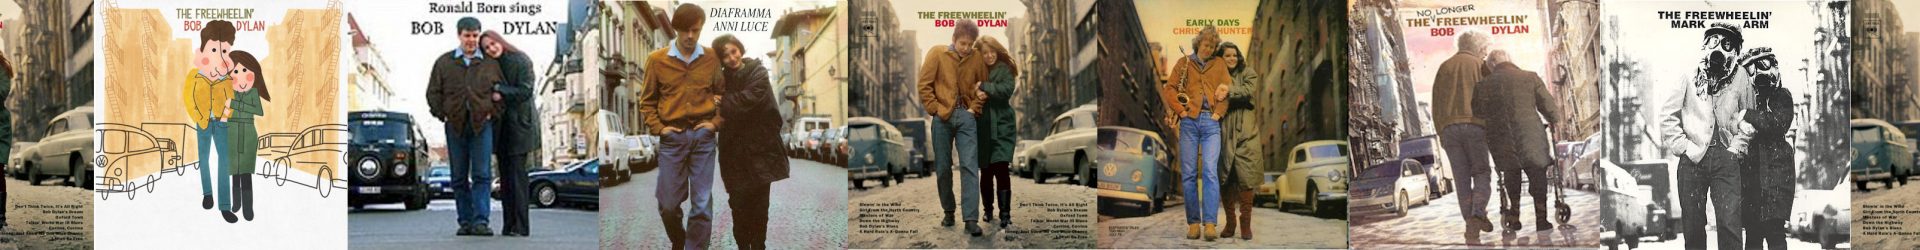 BRUCE SPRINGSTEEN: Song for Orphans – BOB DYLAN: My Back Pages